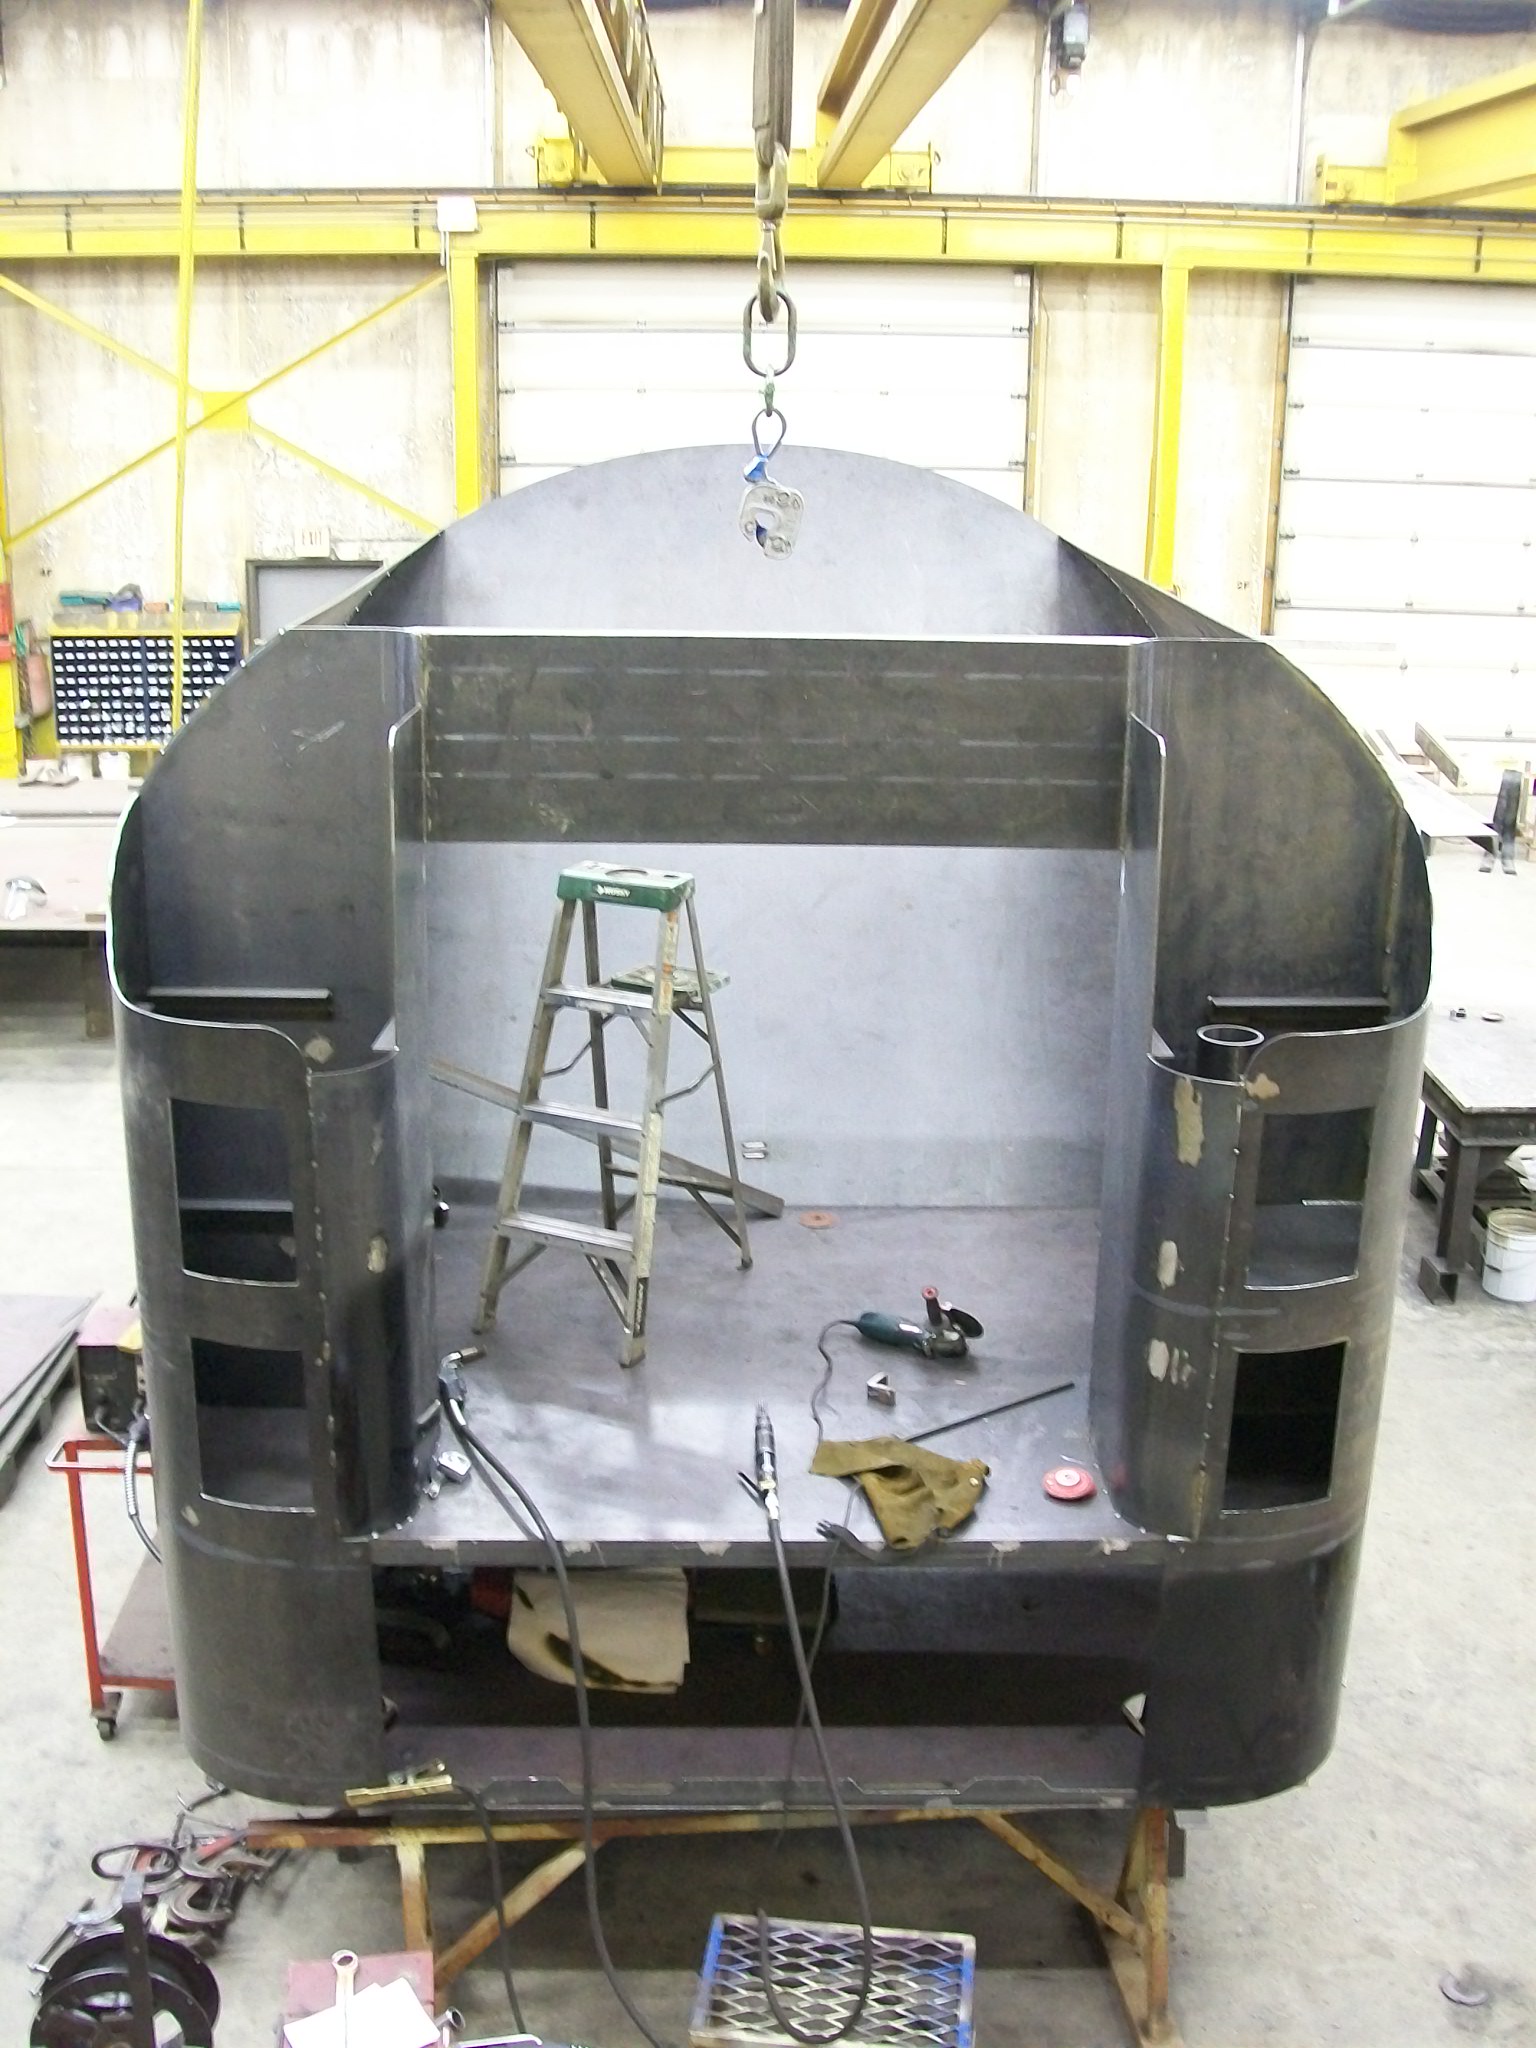 New C&NW 1385 tender tank under construction at DRM Industries. March 2, 2012. Photo by DRM Industries